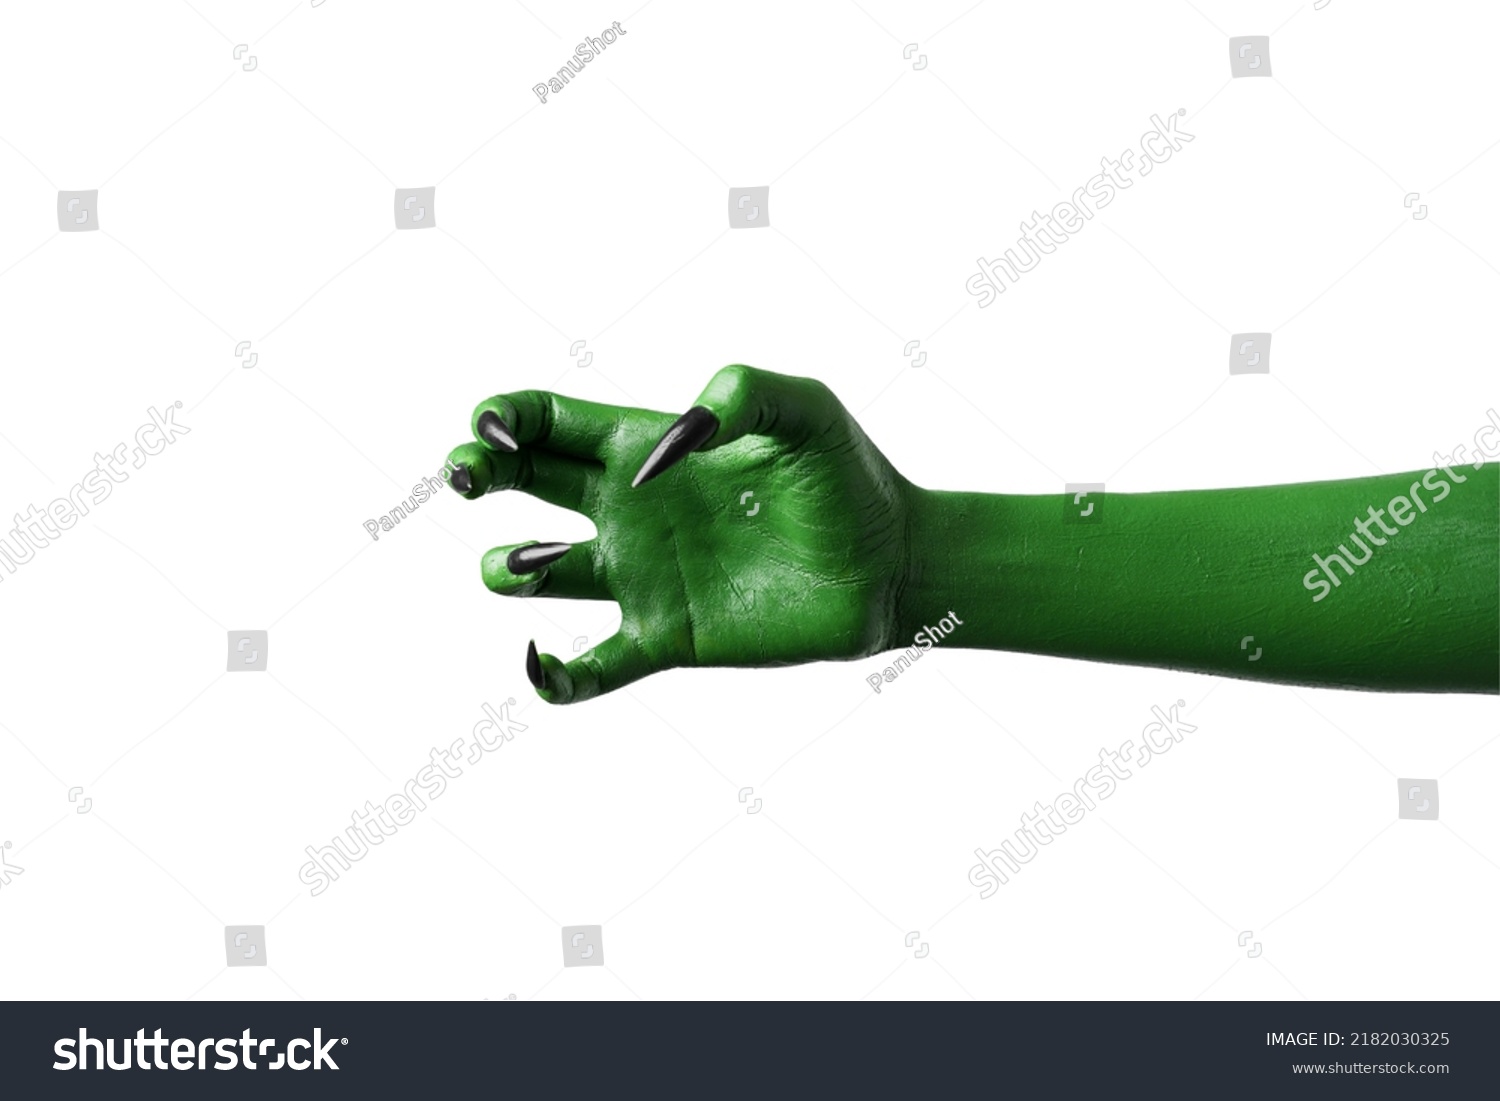 Halloween green color of witches, evil or zombie monster hand isolated on white background. #2182030325